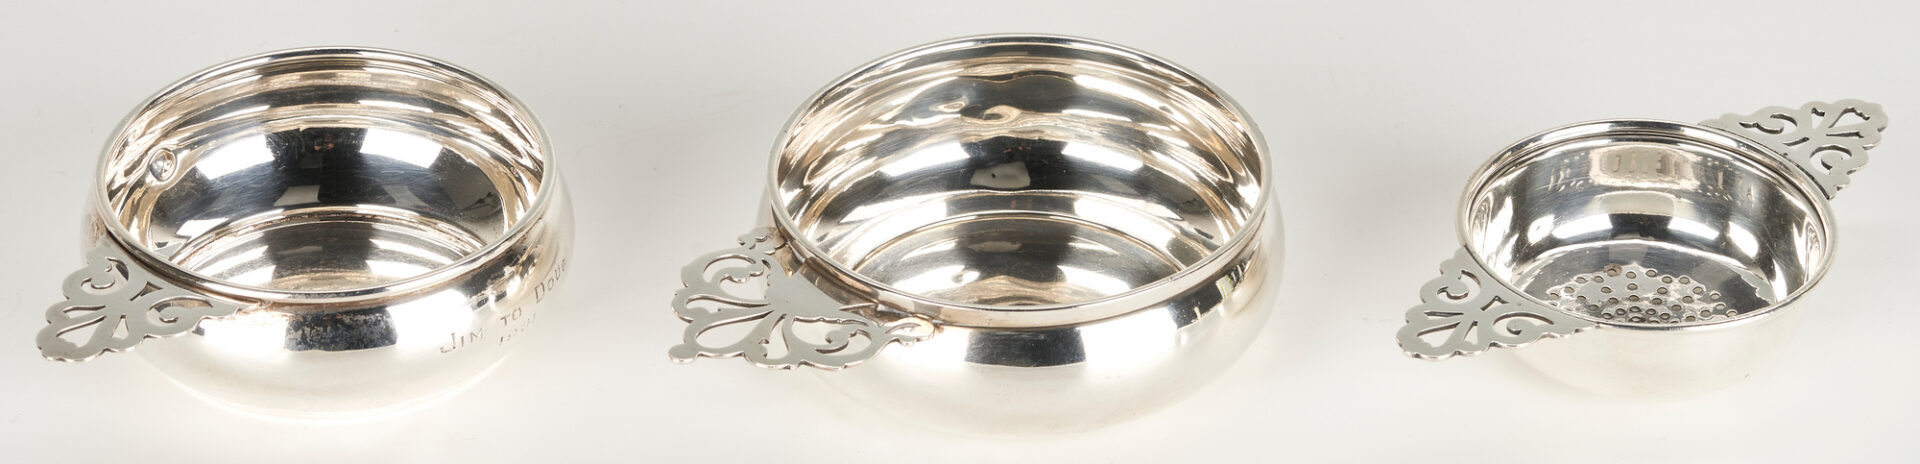 Lot 800: 8 Asst. Sterling Silver Hollowware Items, incl. Watson Footed Bread Tray